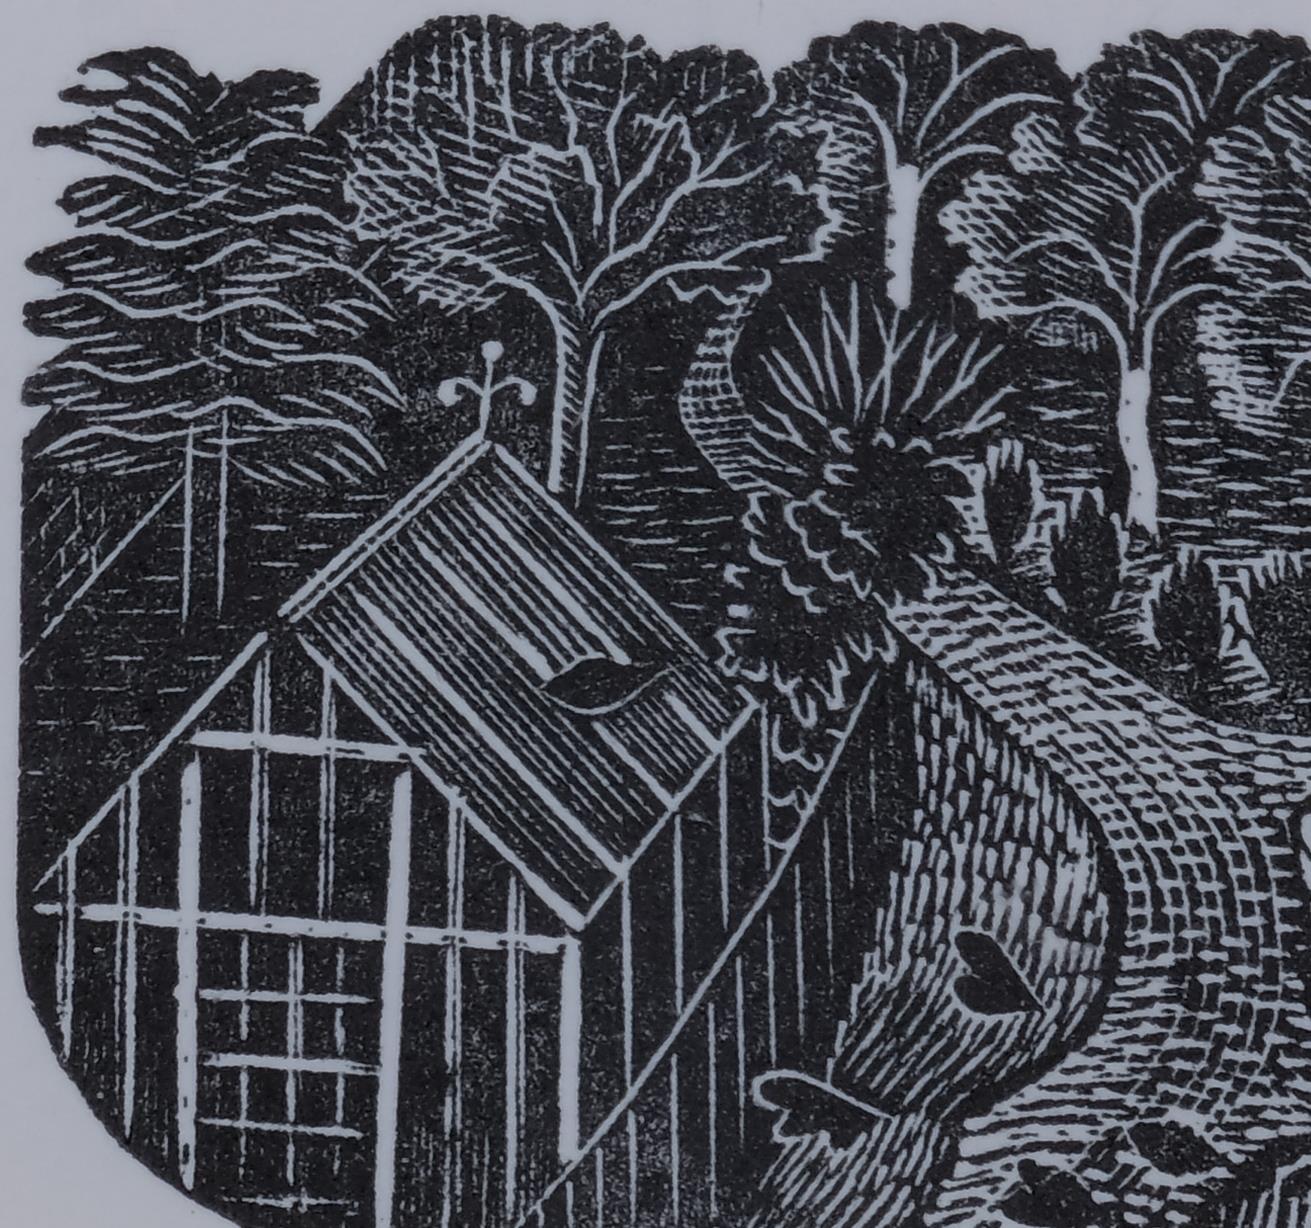 Eric Ravilious (1903-1942), wood engraving on archival paper, Illustration for The St Bride Notebook - Image 3 of 4